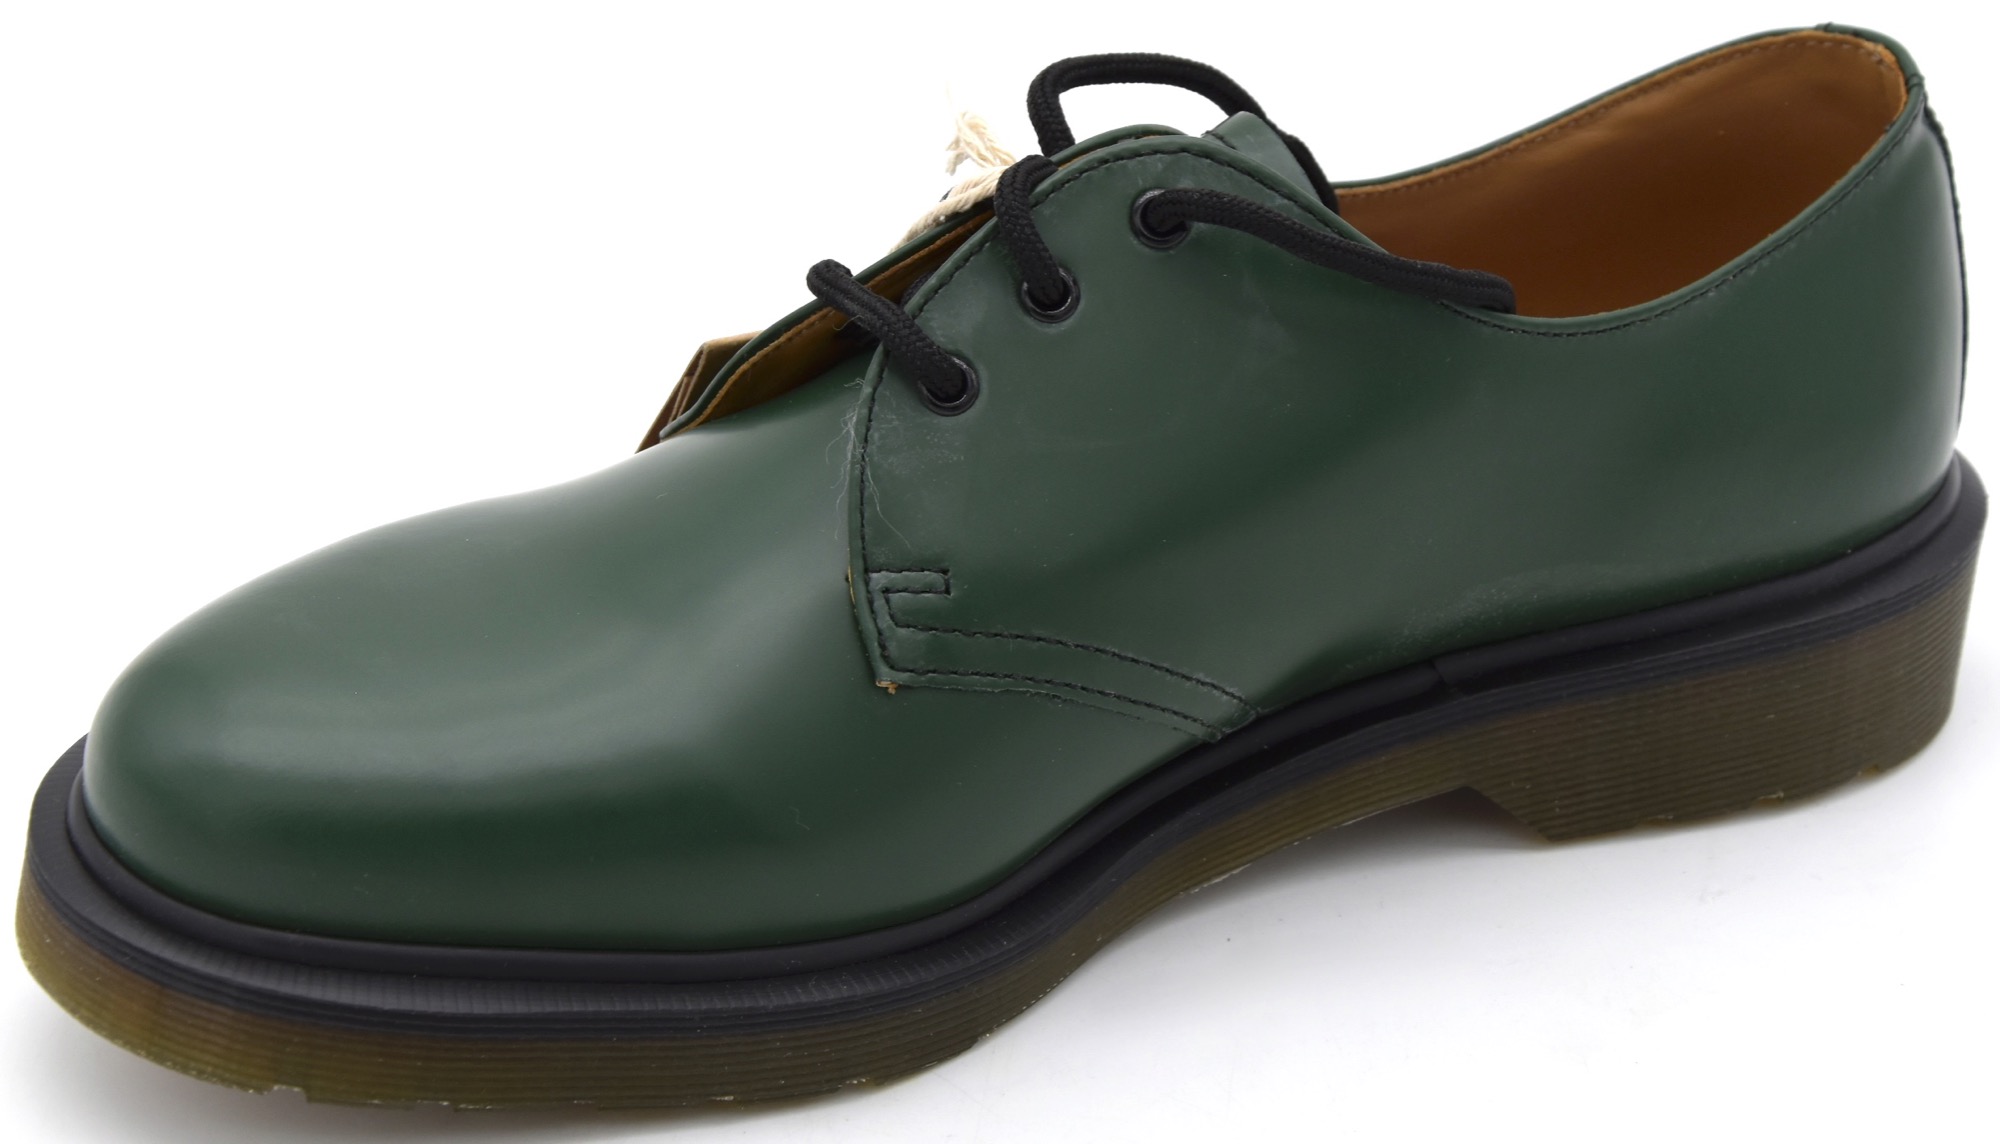 armoede Kent doneren DR. MARTENS WOMAN MAN DRESS SHOES DERBY BUSINESS CLASSIC LEATHER SMOOTH 1461  PW | eBay